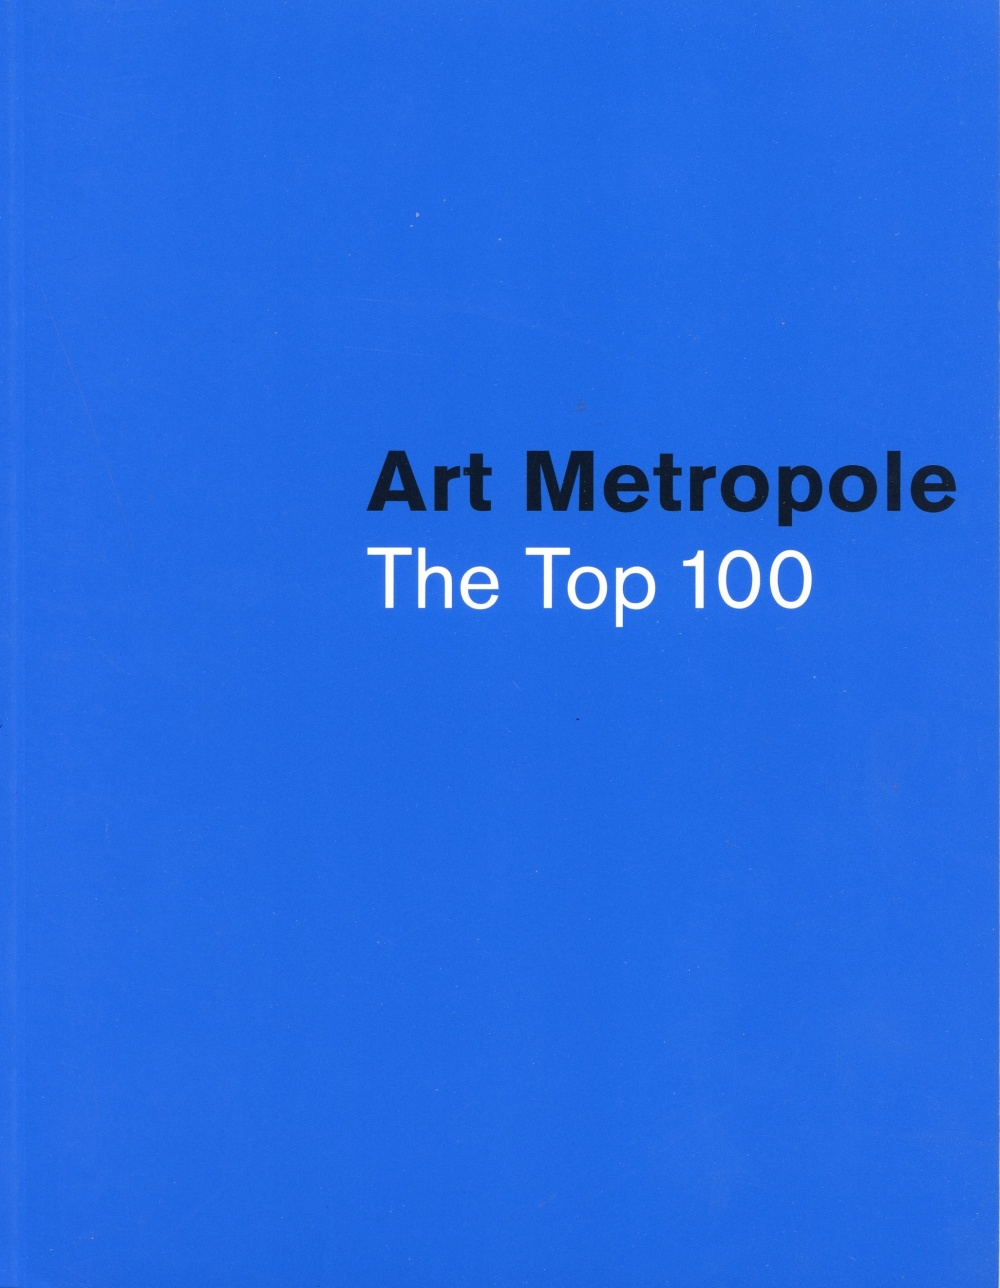 The top 100